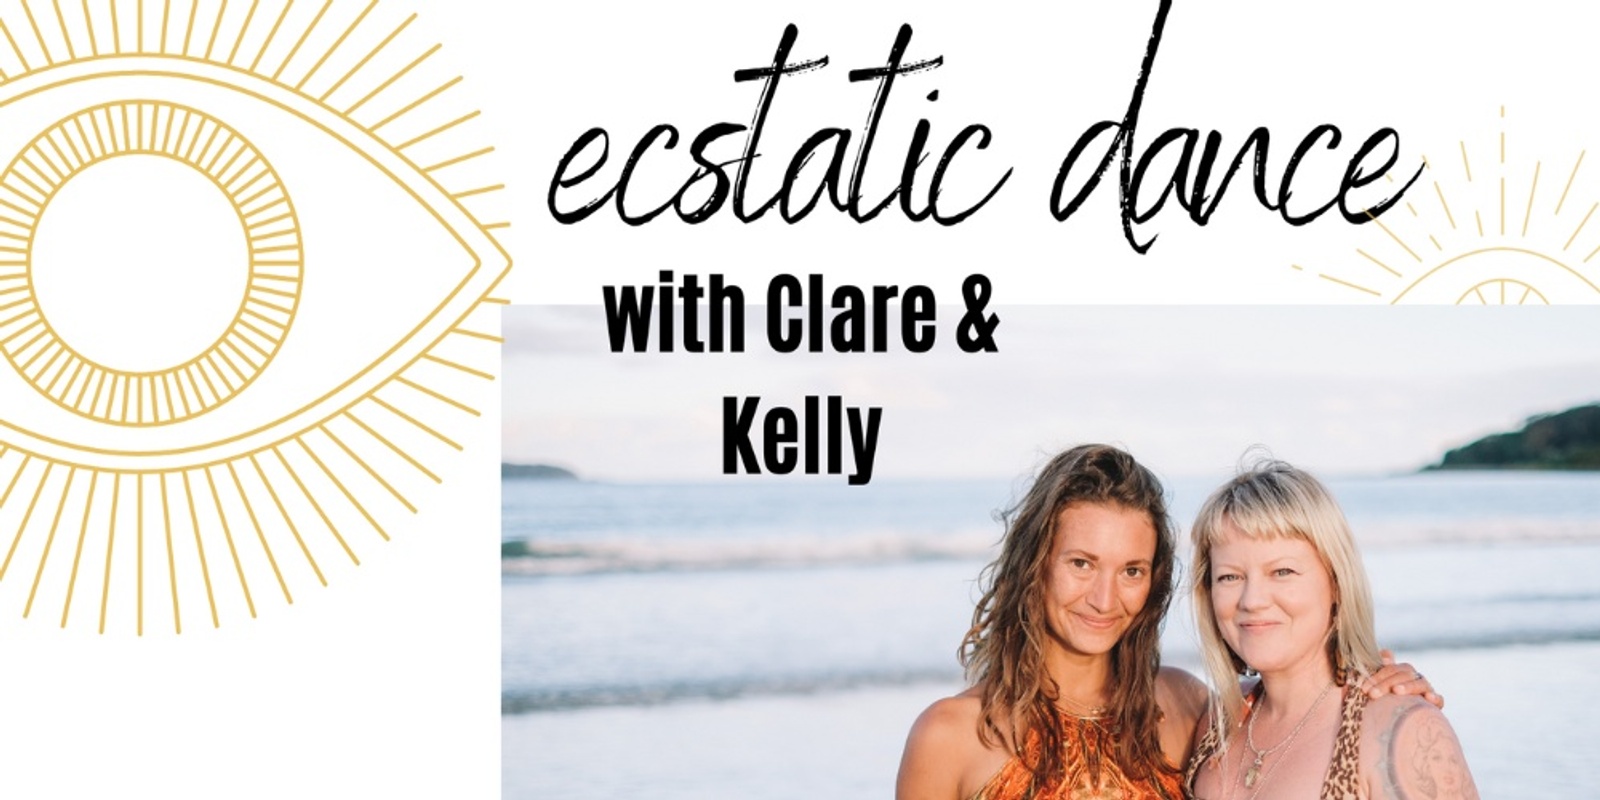 Ecstatic Dance with Clare & Kelly